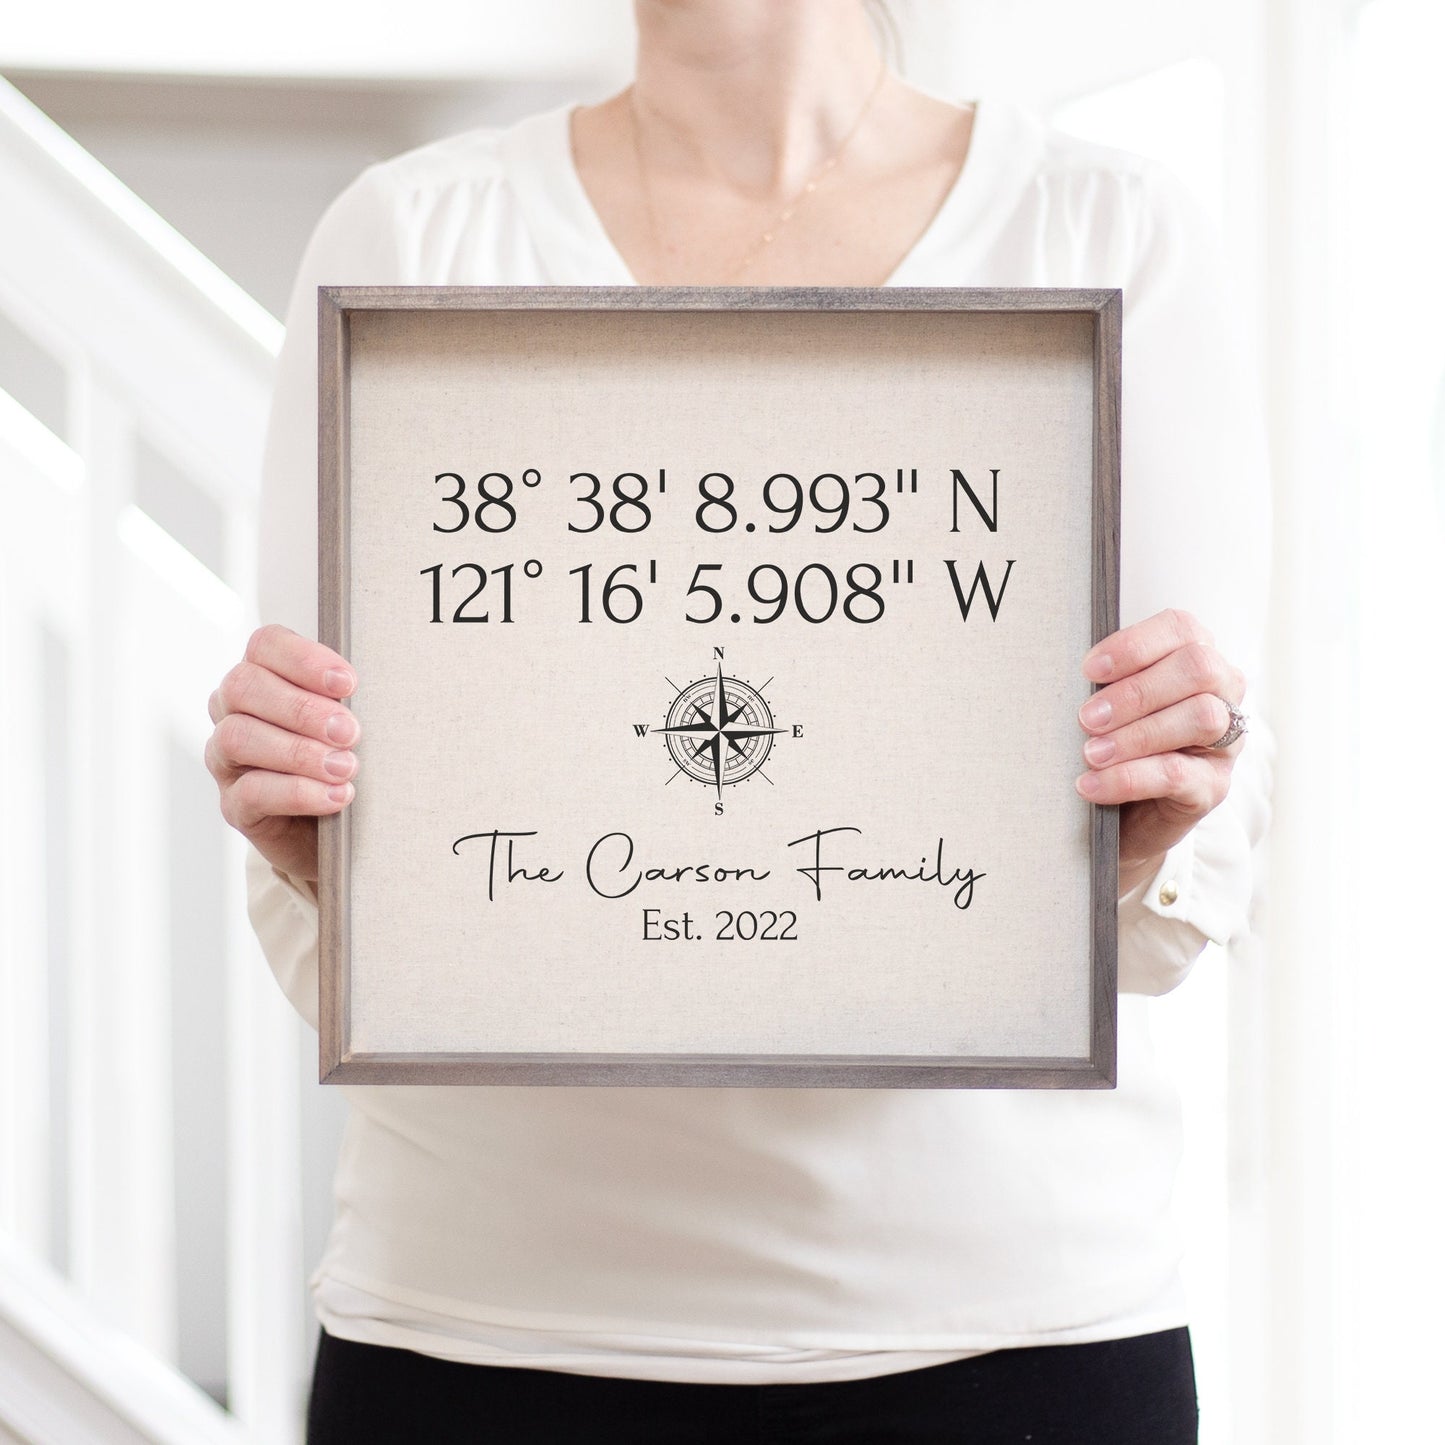 Load image into Gallery viewer, Latitude and Longitude Compass Framed Linen Print | Personalized Wedding Gift | GPS Coordinates | HostessGift | Housewarming Gift for Couple
